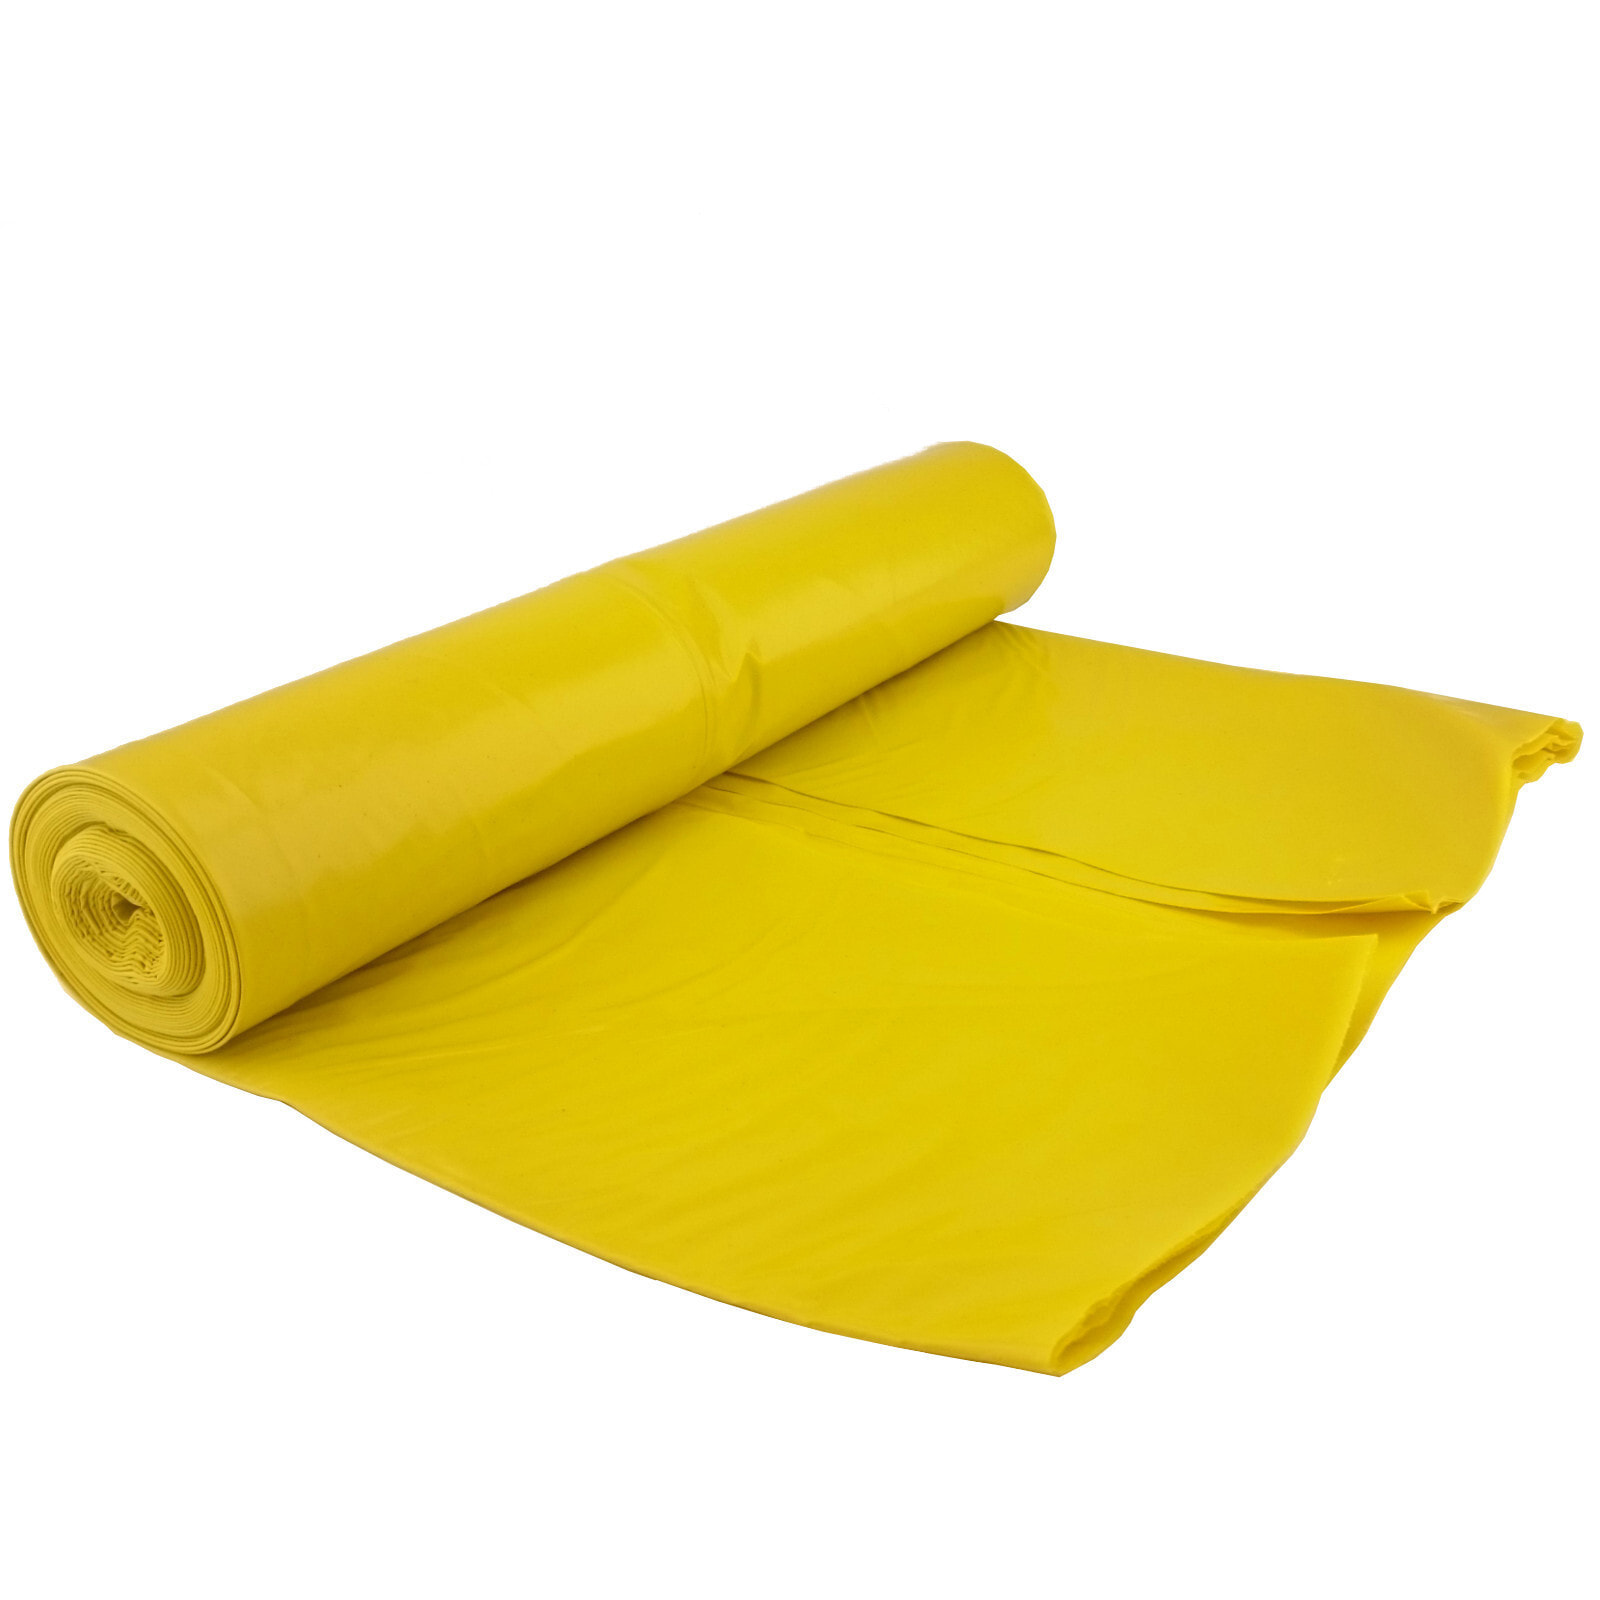 80 micron thick garbage bags. durable roll 15 pcs. - yellow 120L